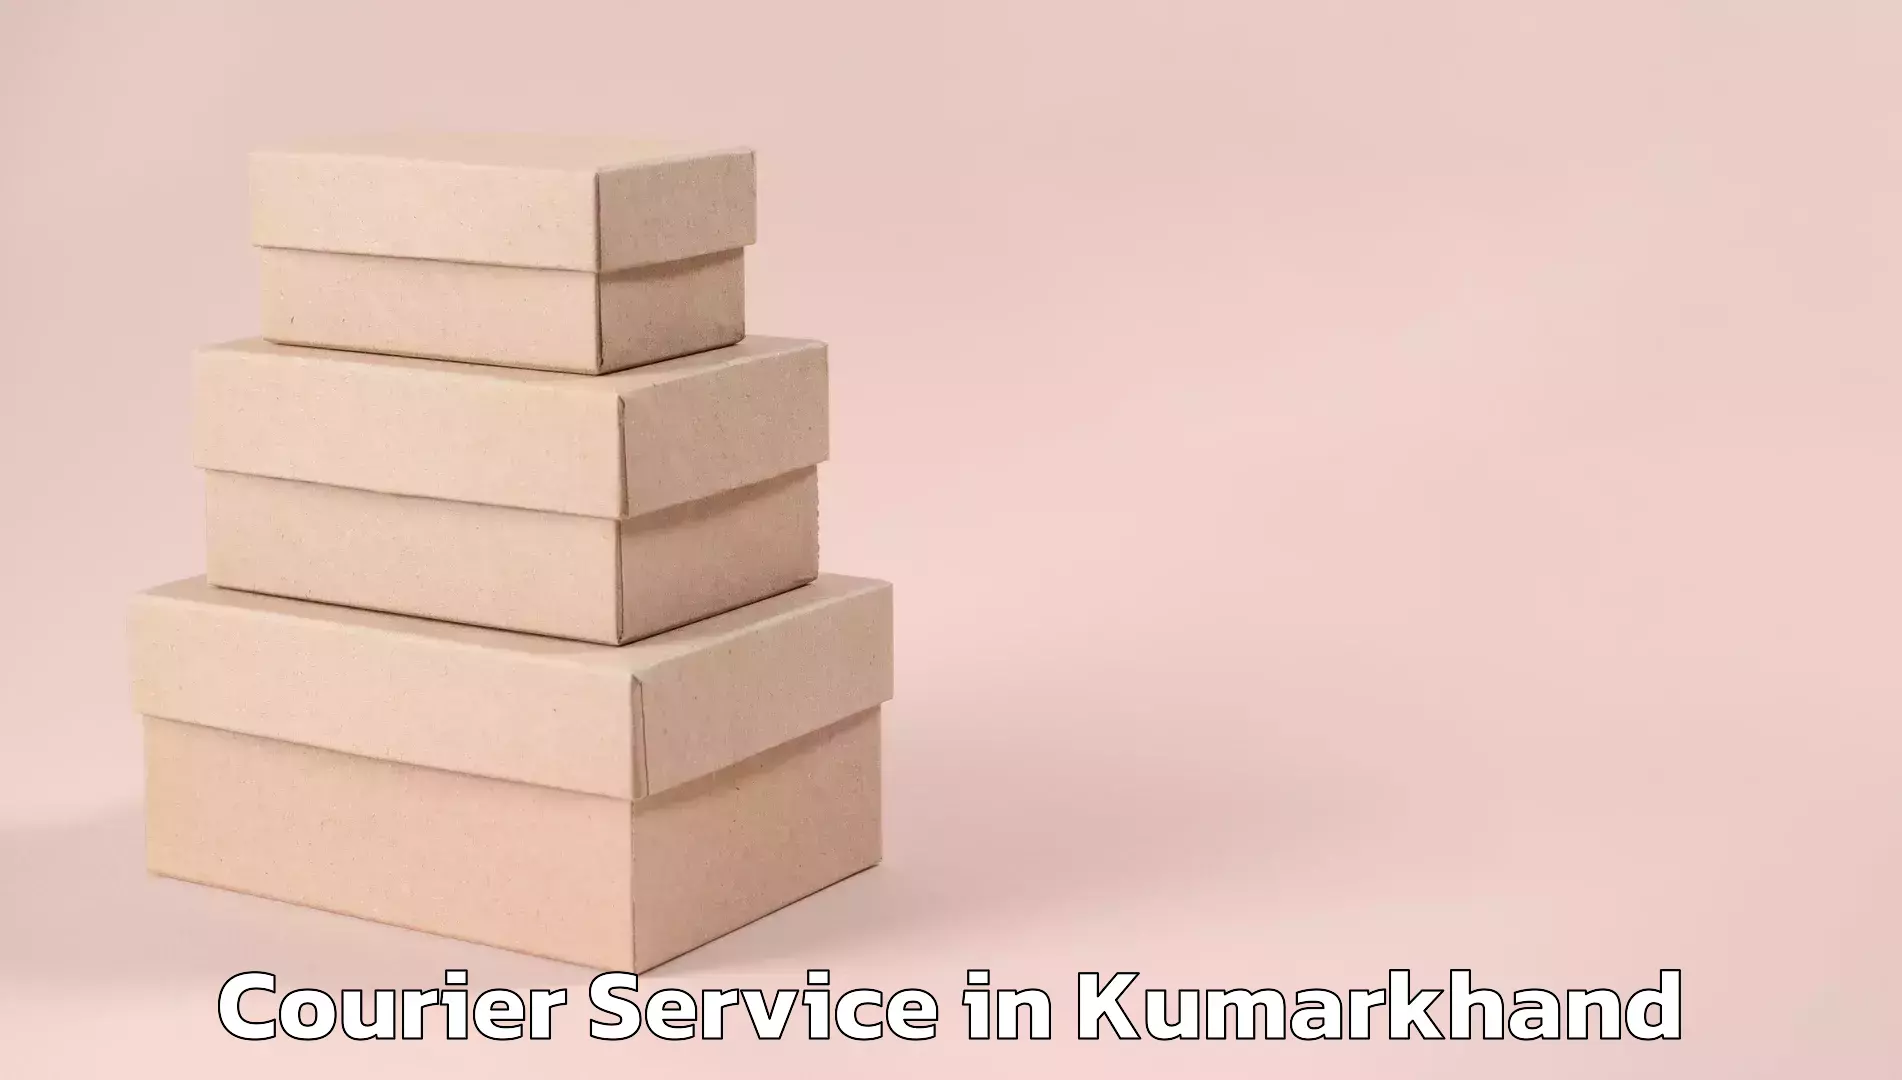 Parcel delivery automation in Kumarkhand